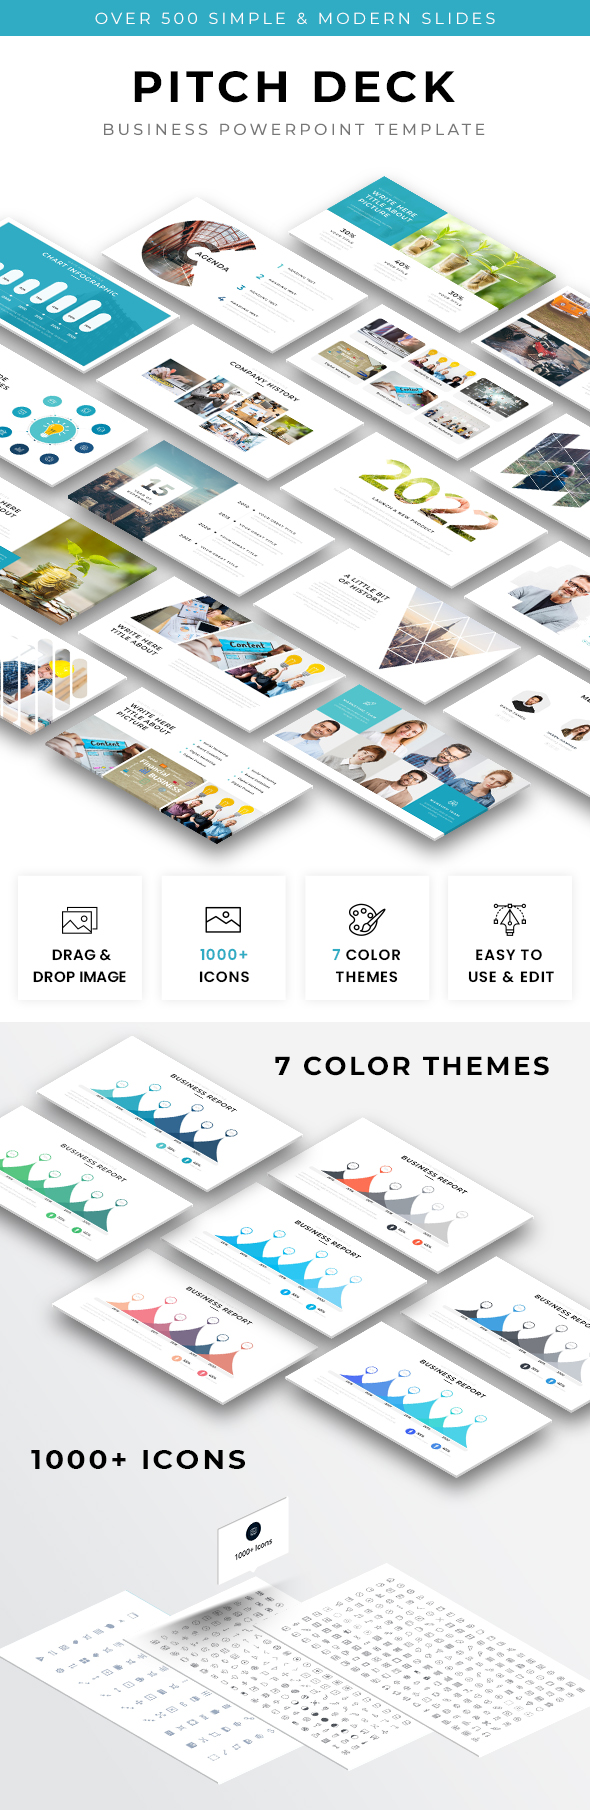 Pitch Deck – Contemporary Powerpoint Template